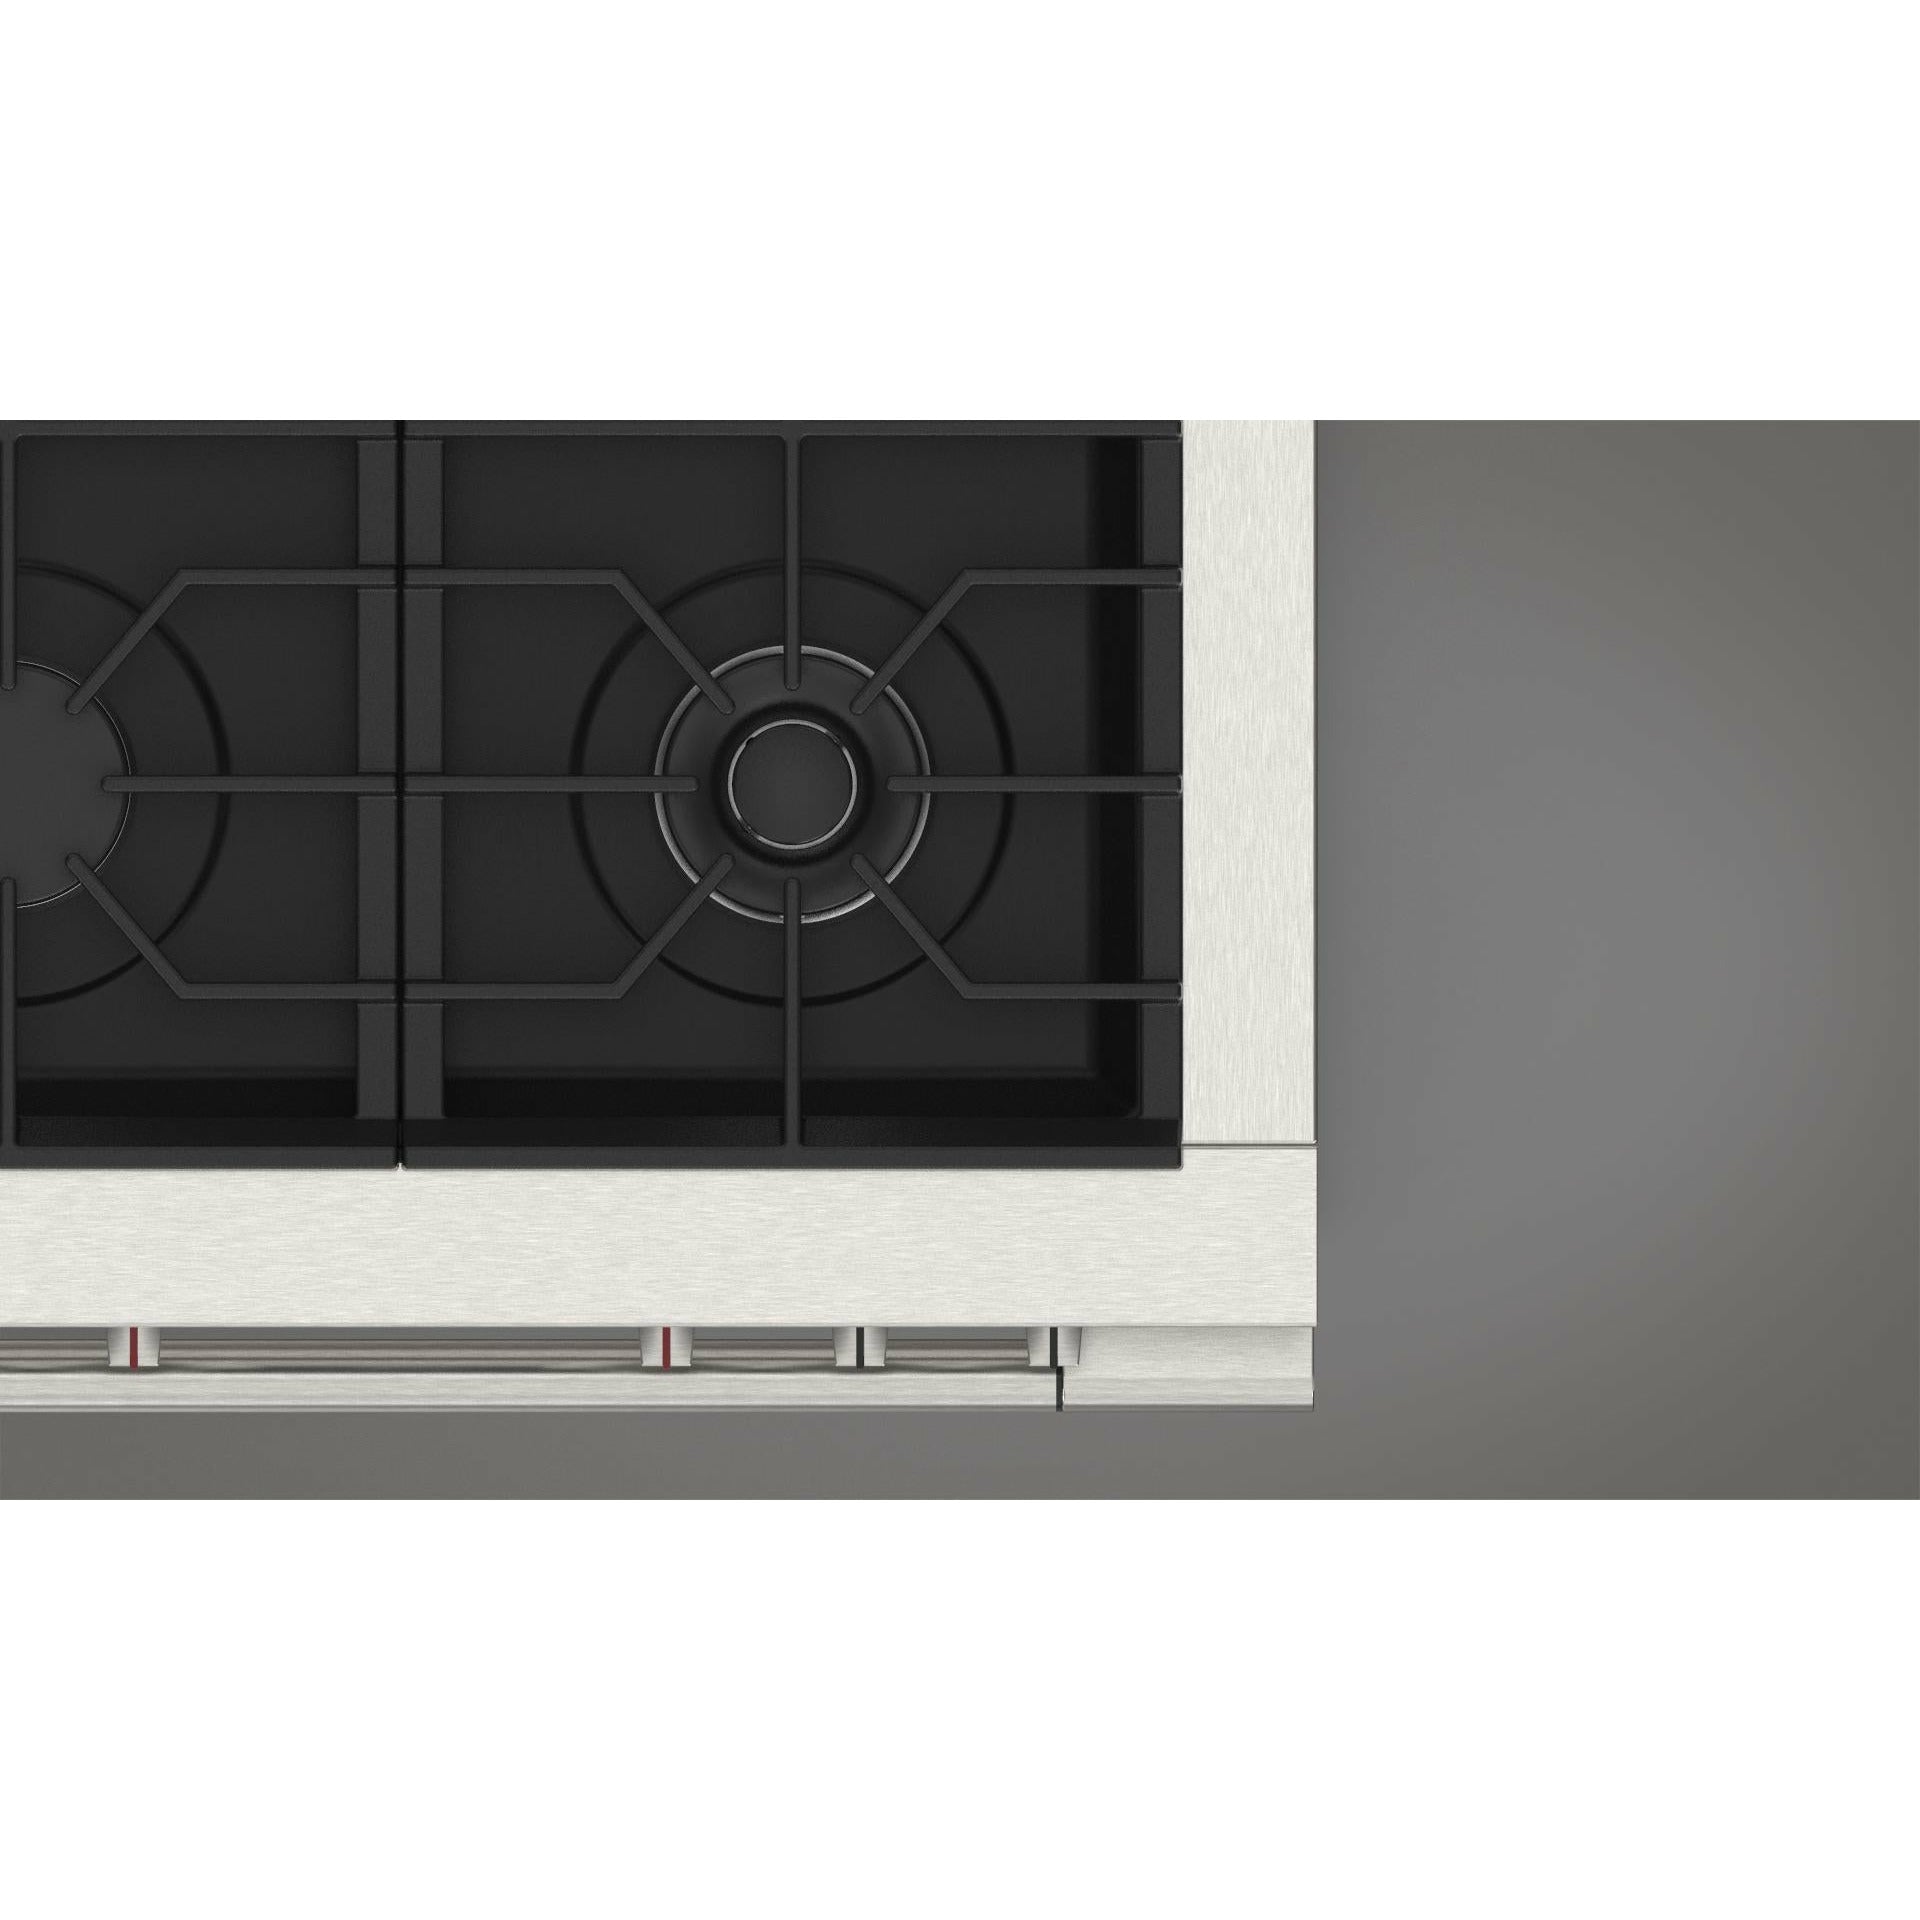 Fulgor Milano 30" Pro-Style Dual Fuel Range with 4 Sealed Burners,  4.4 Cu. Ft. Capacity w/  Stainless Steel - F4PDF304S1